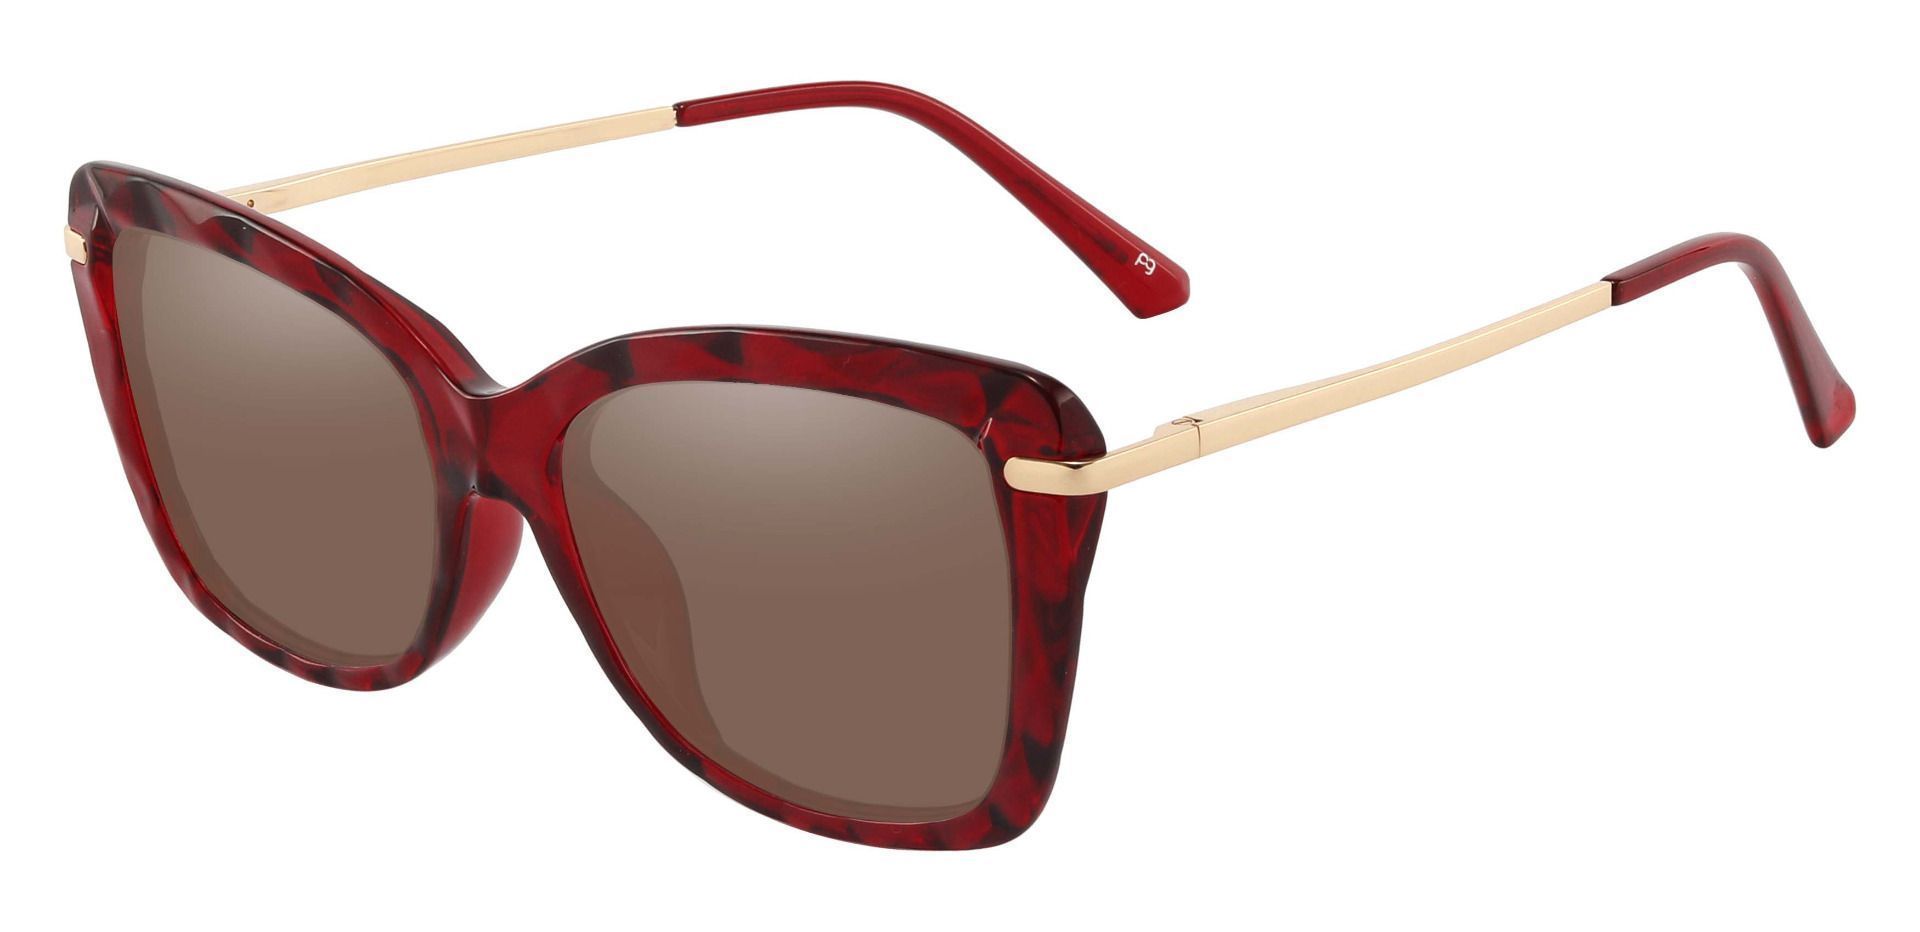 Shoshanna Rectangle Non-Rx Sunglasses - Red Frame With Brown Lenses